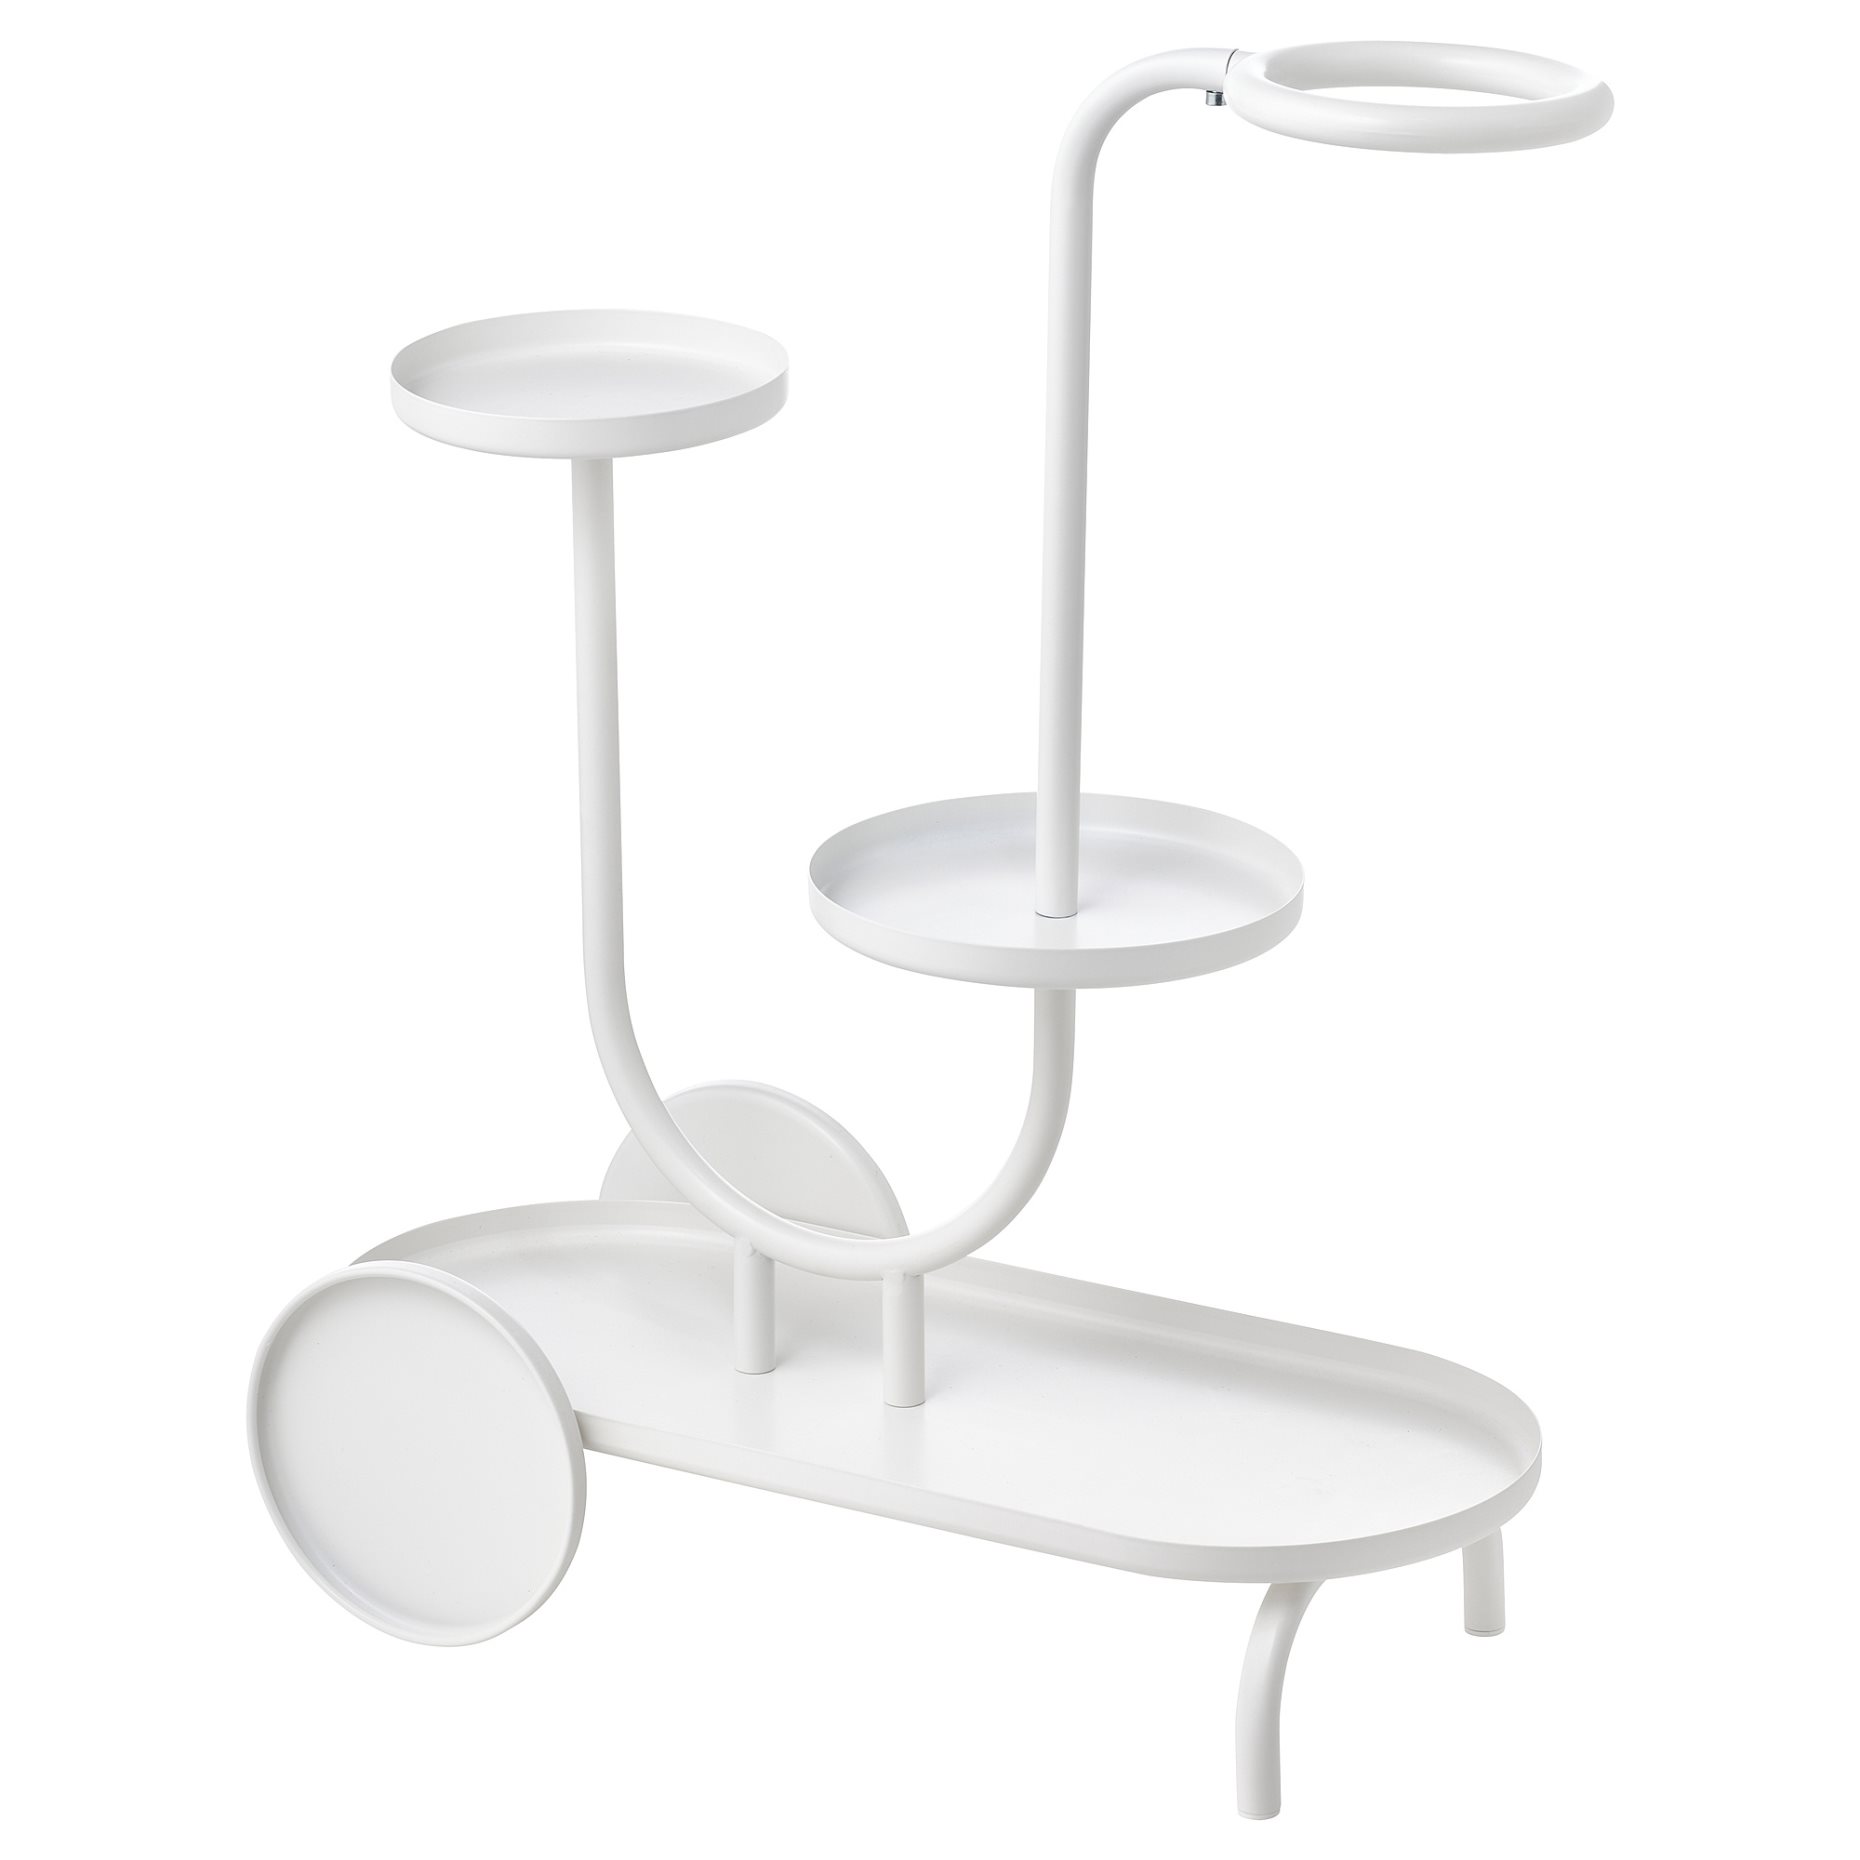 CHILISTRÅN, plant stand with wheels, 75 cm, 004.922.48